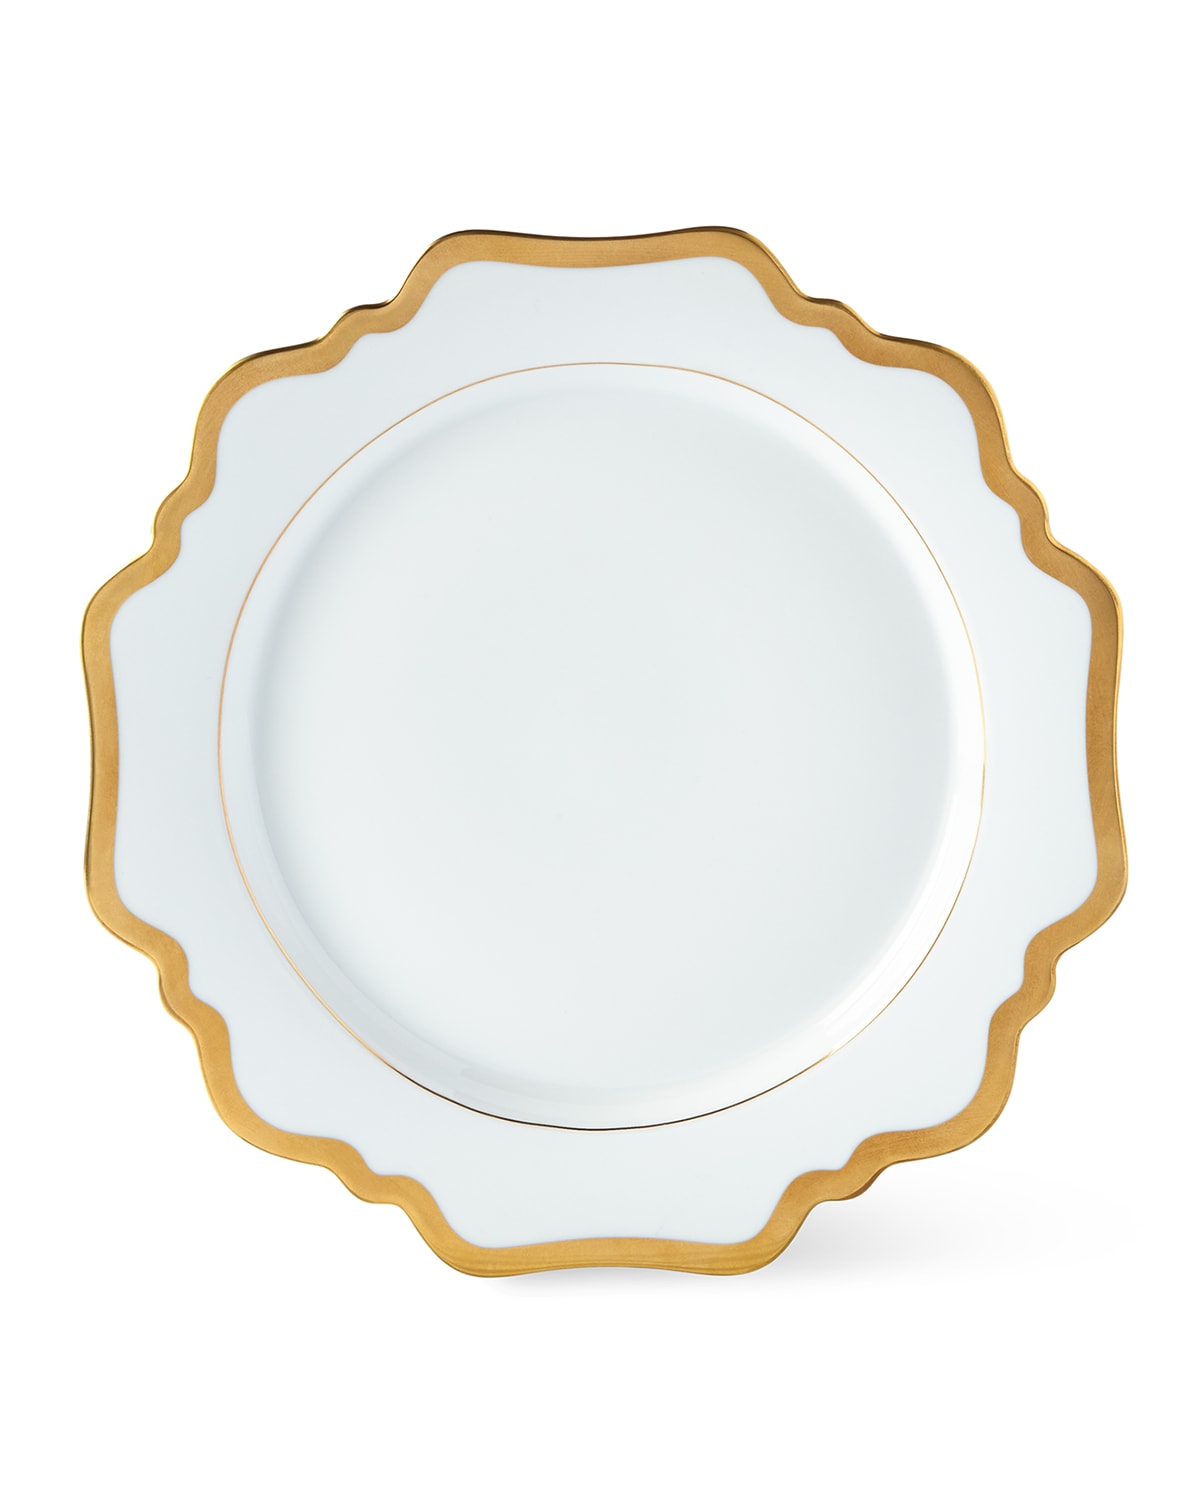 ANNA WEATHERLEY ANTIQUED WHITE DINNER PLATE